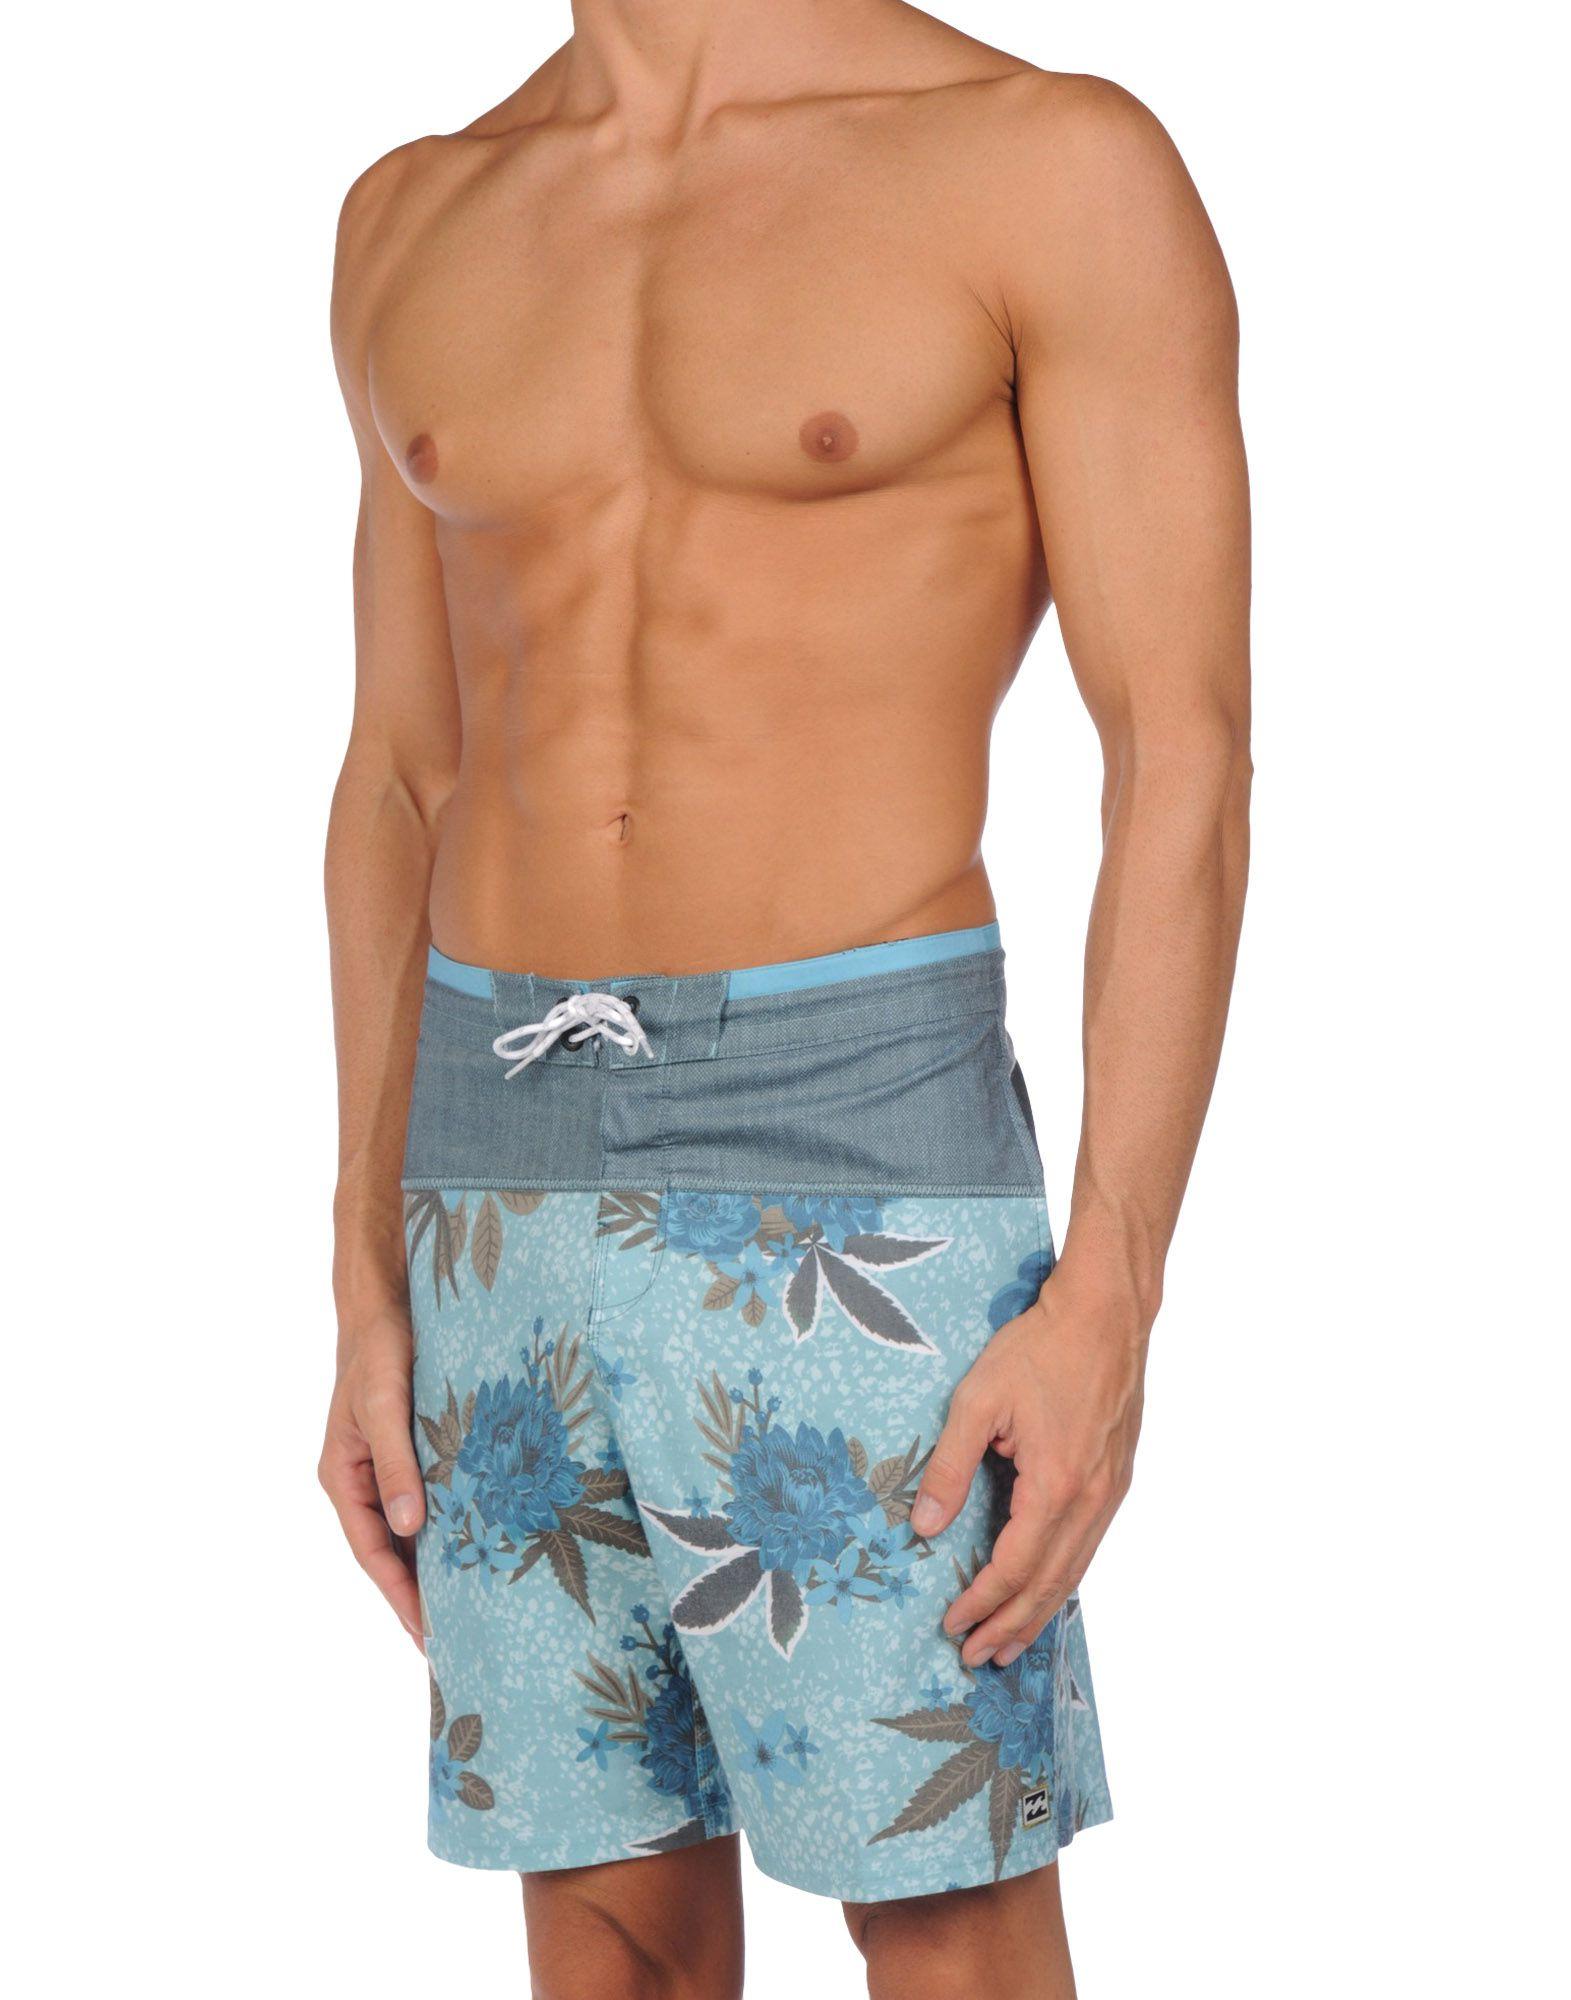 Lyst - Billabong Beach Shorts And Trousers in Blue for Men